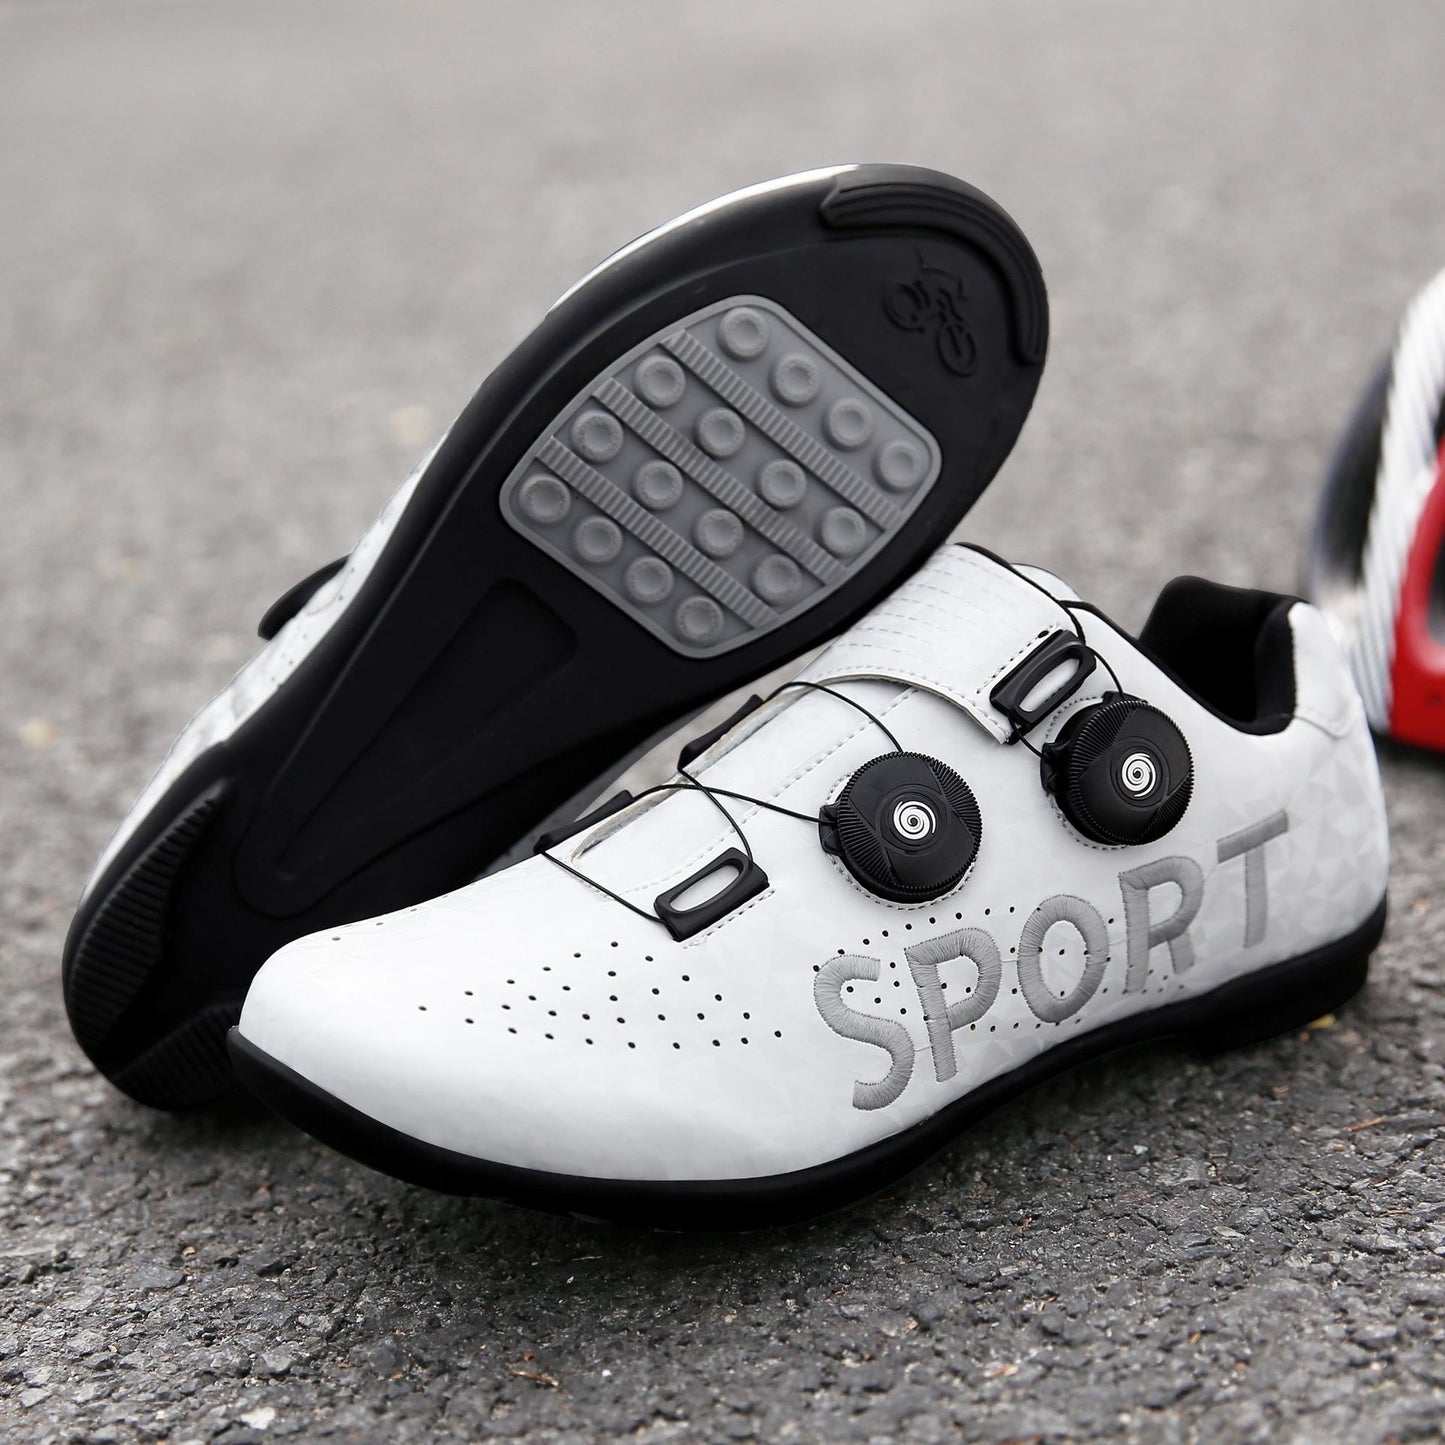 Specialised Unisex Racing Trek Cycling Shoes